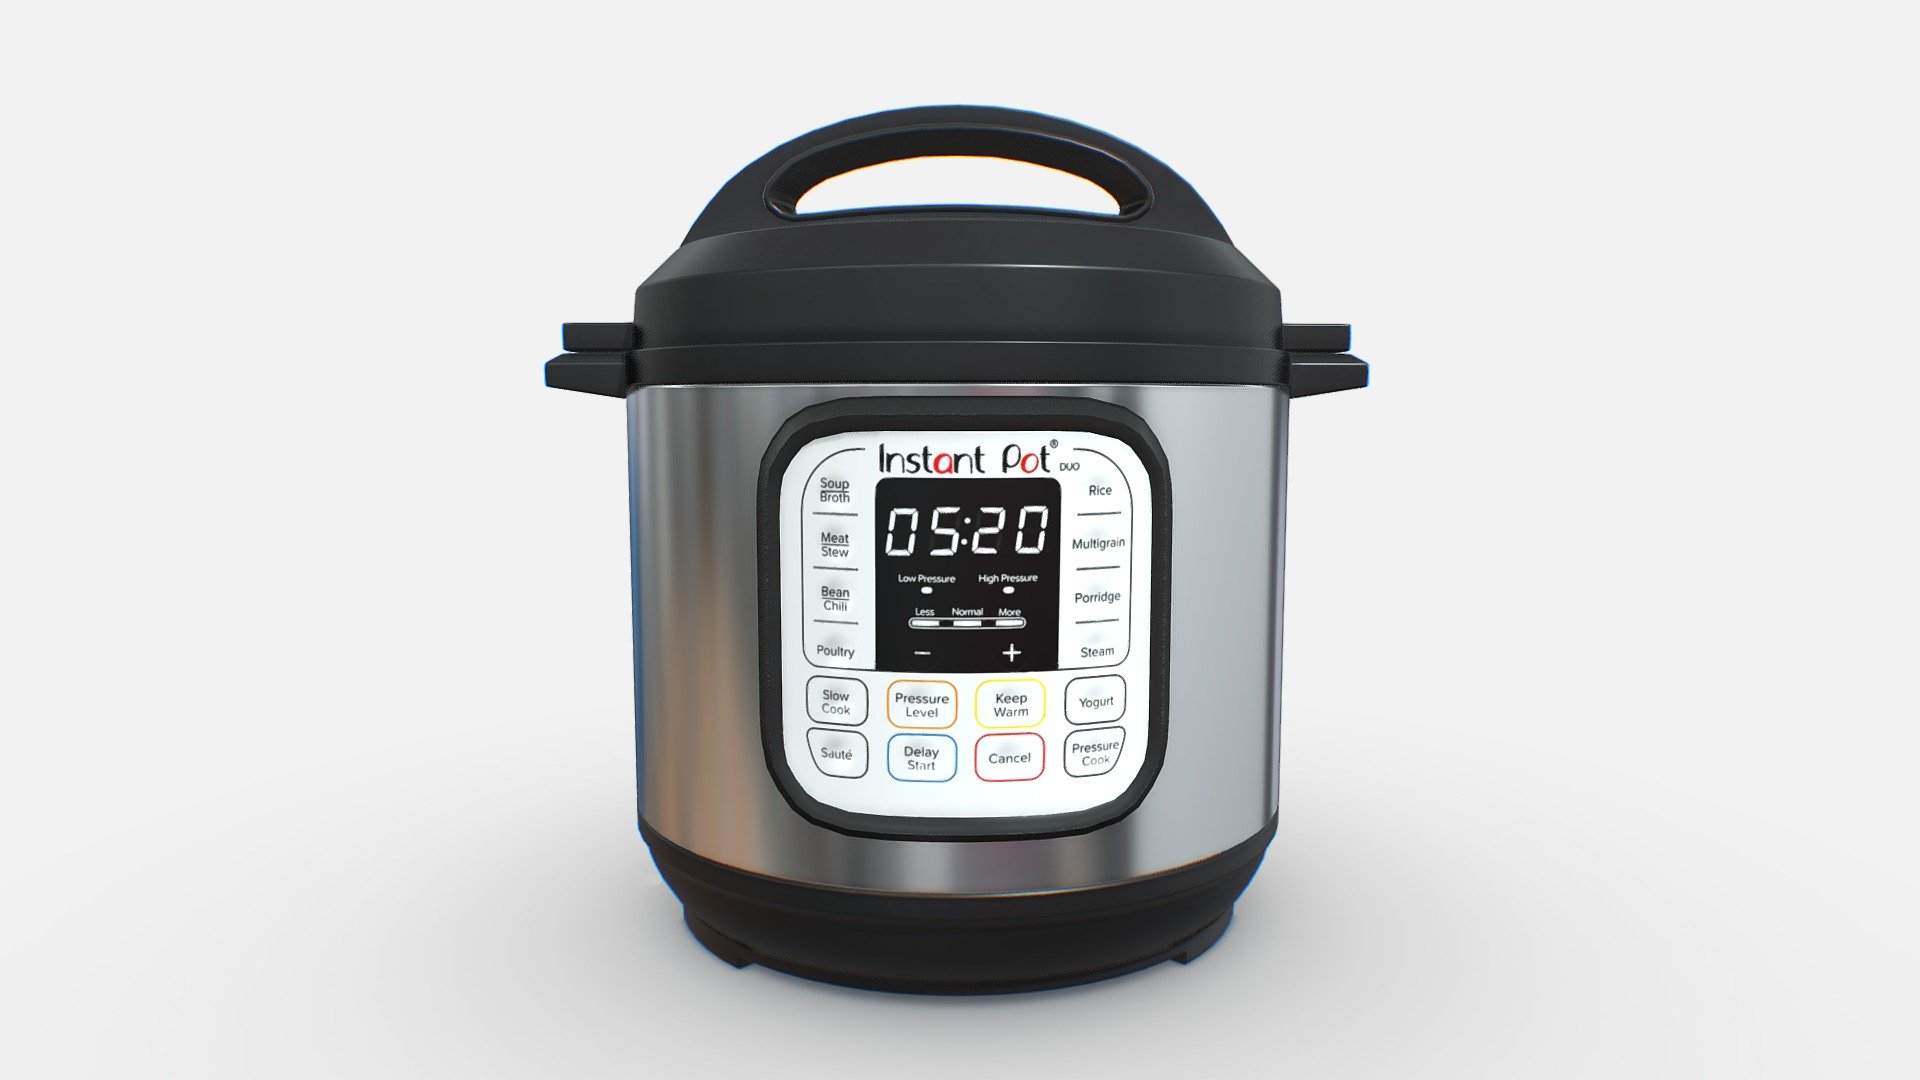 A 3D PBR model based on Instant Pot Duo 6 QT Multicooker. Made within Blender 3.1 and beauty rendered with eevee.

Recommended Usage :




Archviz

UE5

UE4

Model Specification :




All quads with minimum triangulations

Varied texel density based on the complextiy of the details

Subdivision Ready within Blender only.

Texture size available 2048/1024/512p

Naming convention based on UE5 Naming Convention
 - Instant Pot Duo 6 QT - Pressure Cooker - Buy Royalty Free 3D model by MozzarellaARC 3d model